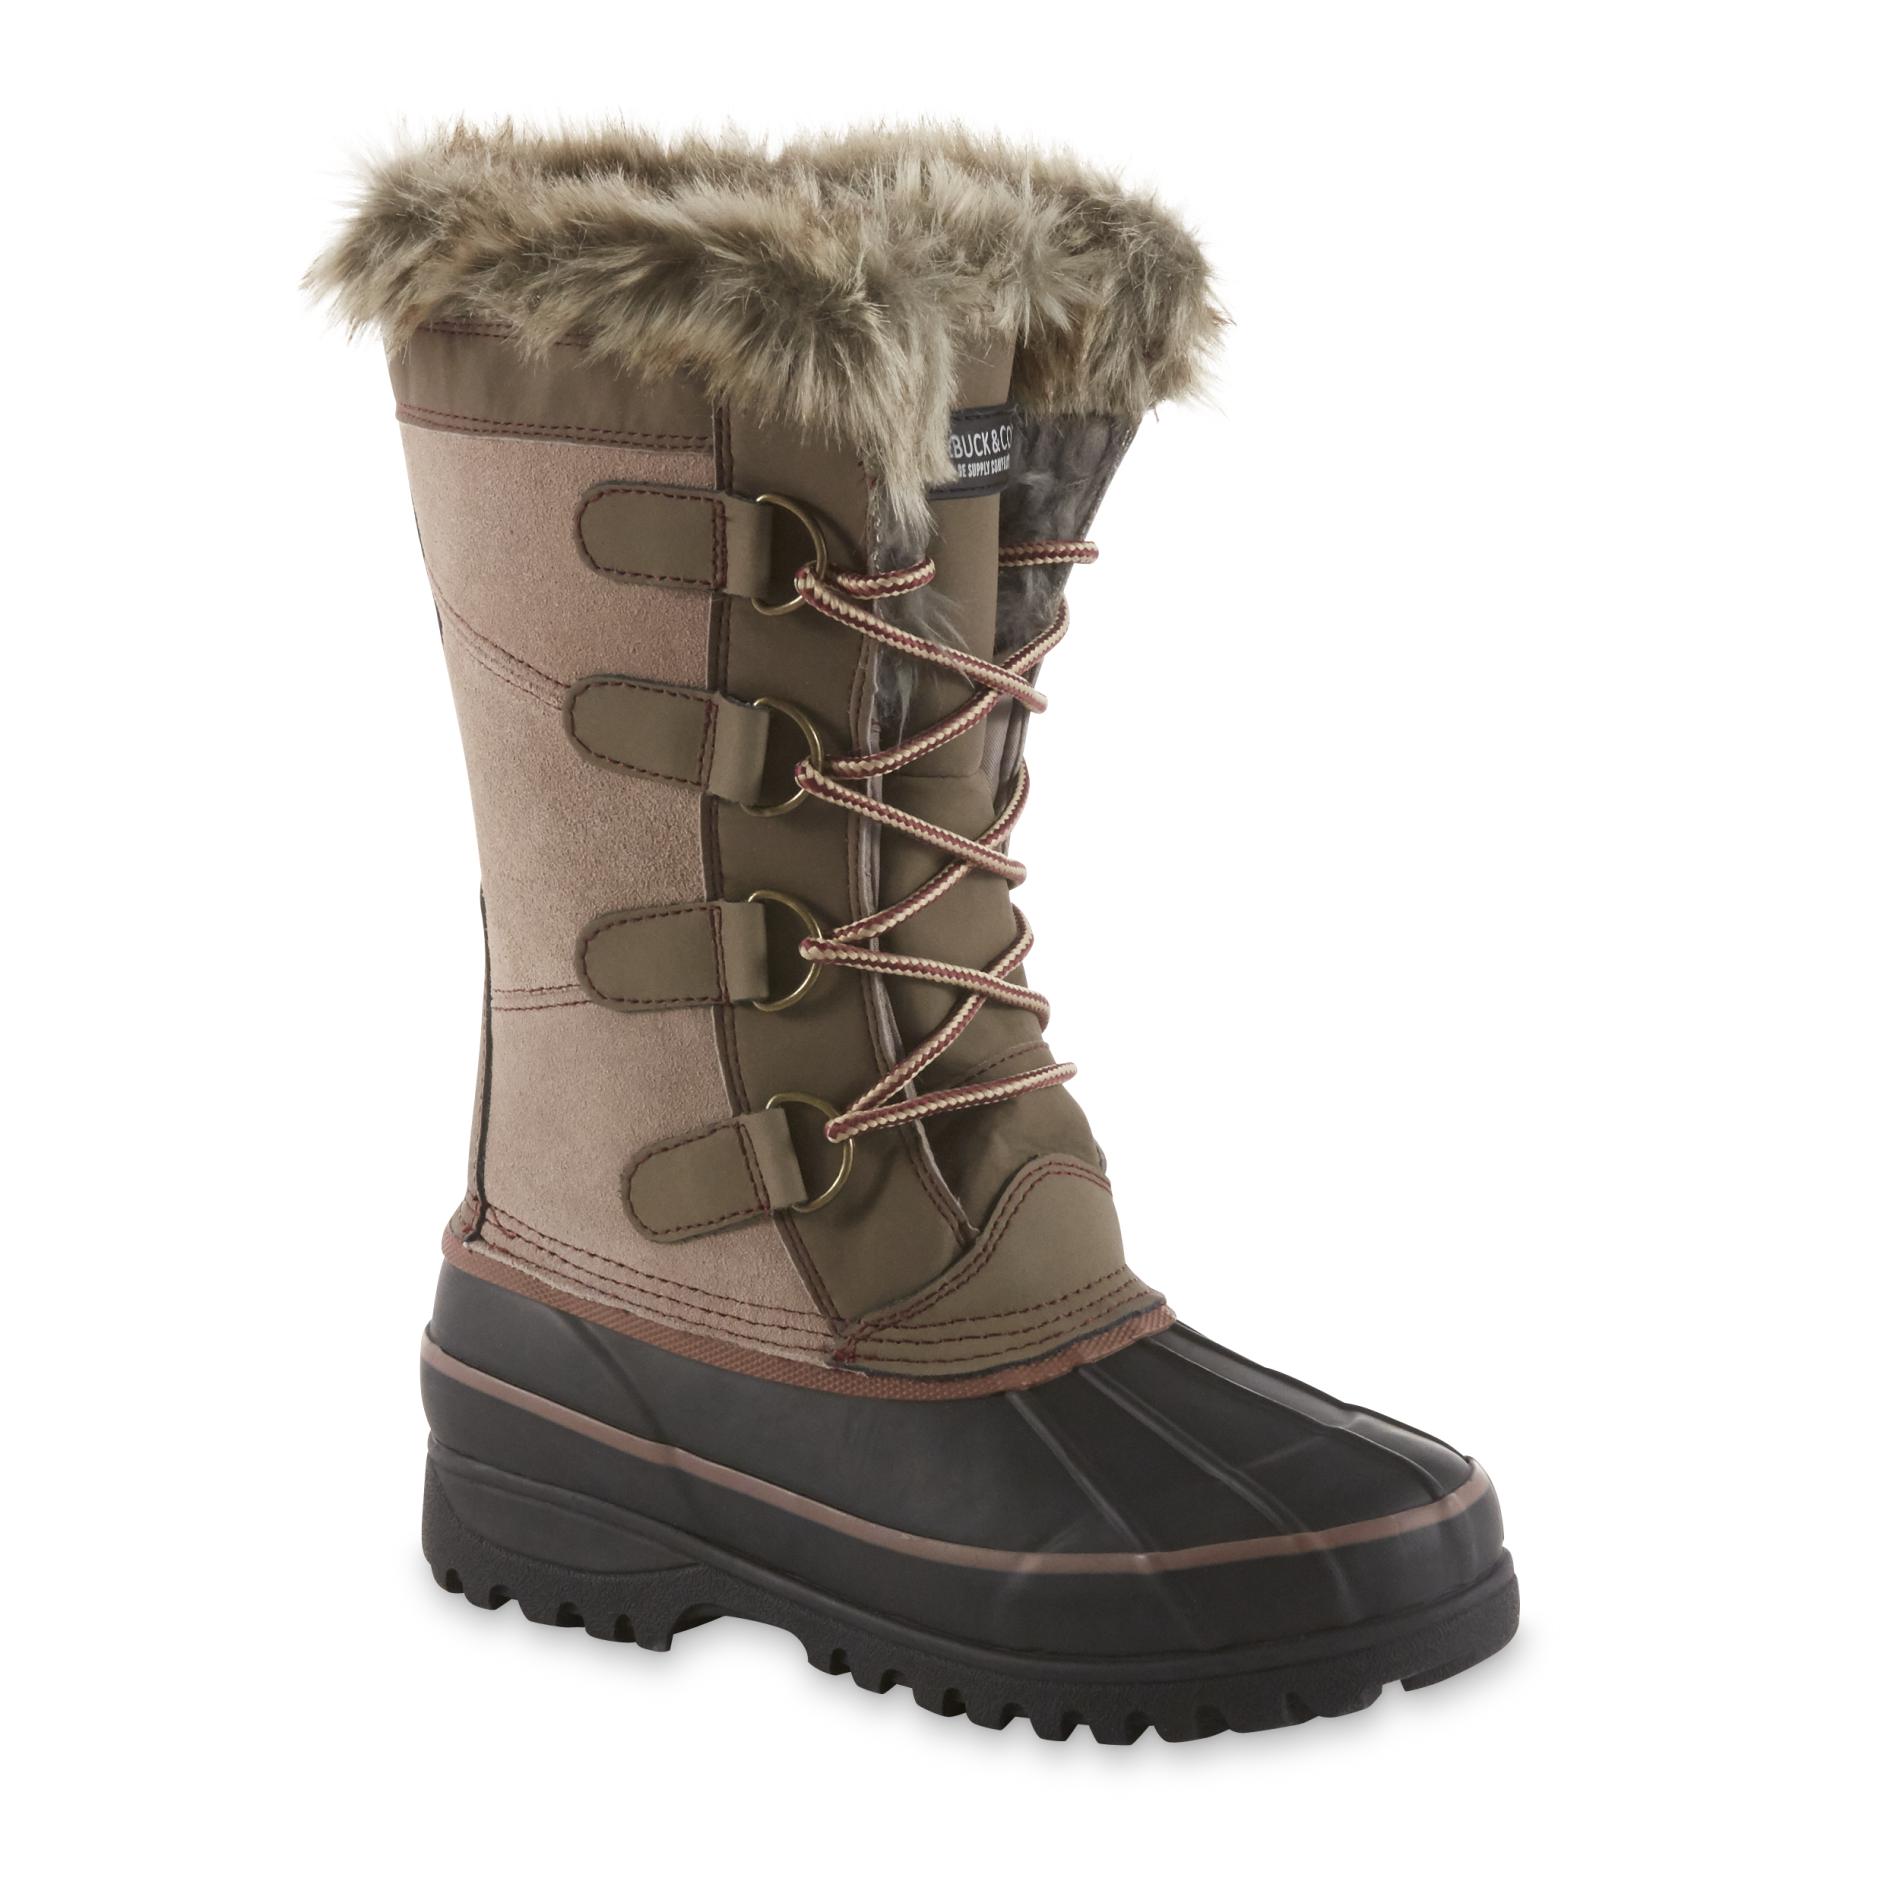 Roebuck & Co. Women's Fifi Winter/Weather Boot - Taupe